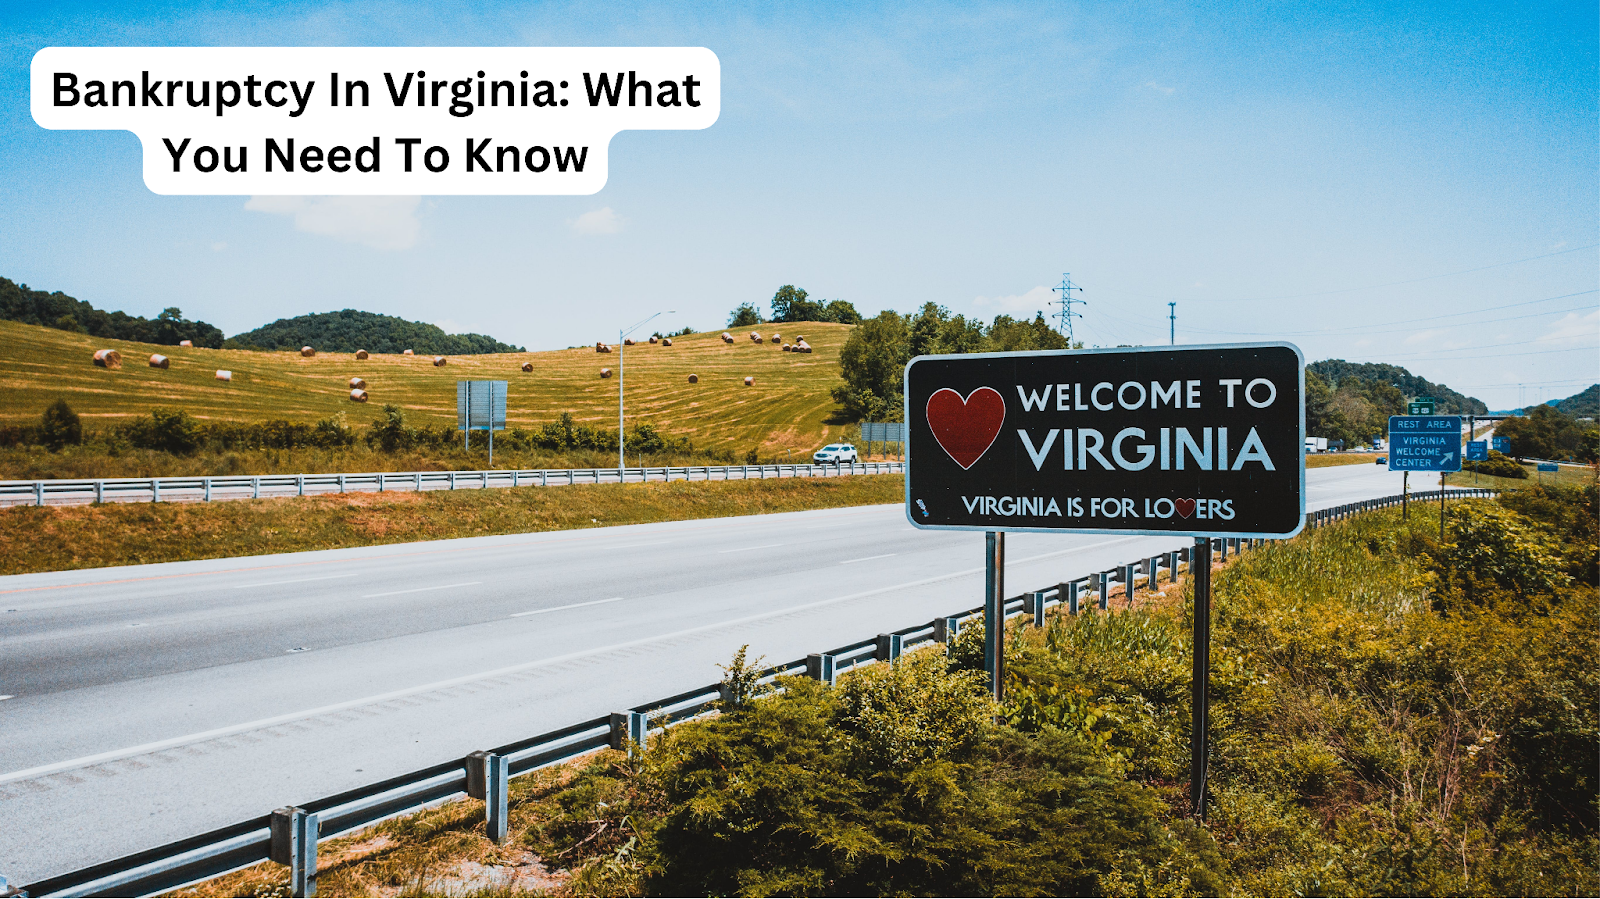 Bankruptcy In Virginia: What You Need To Know